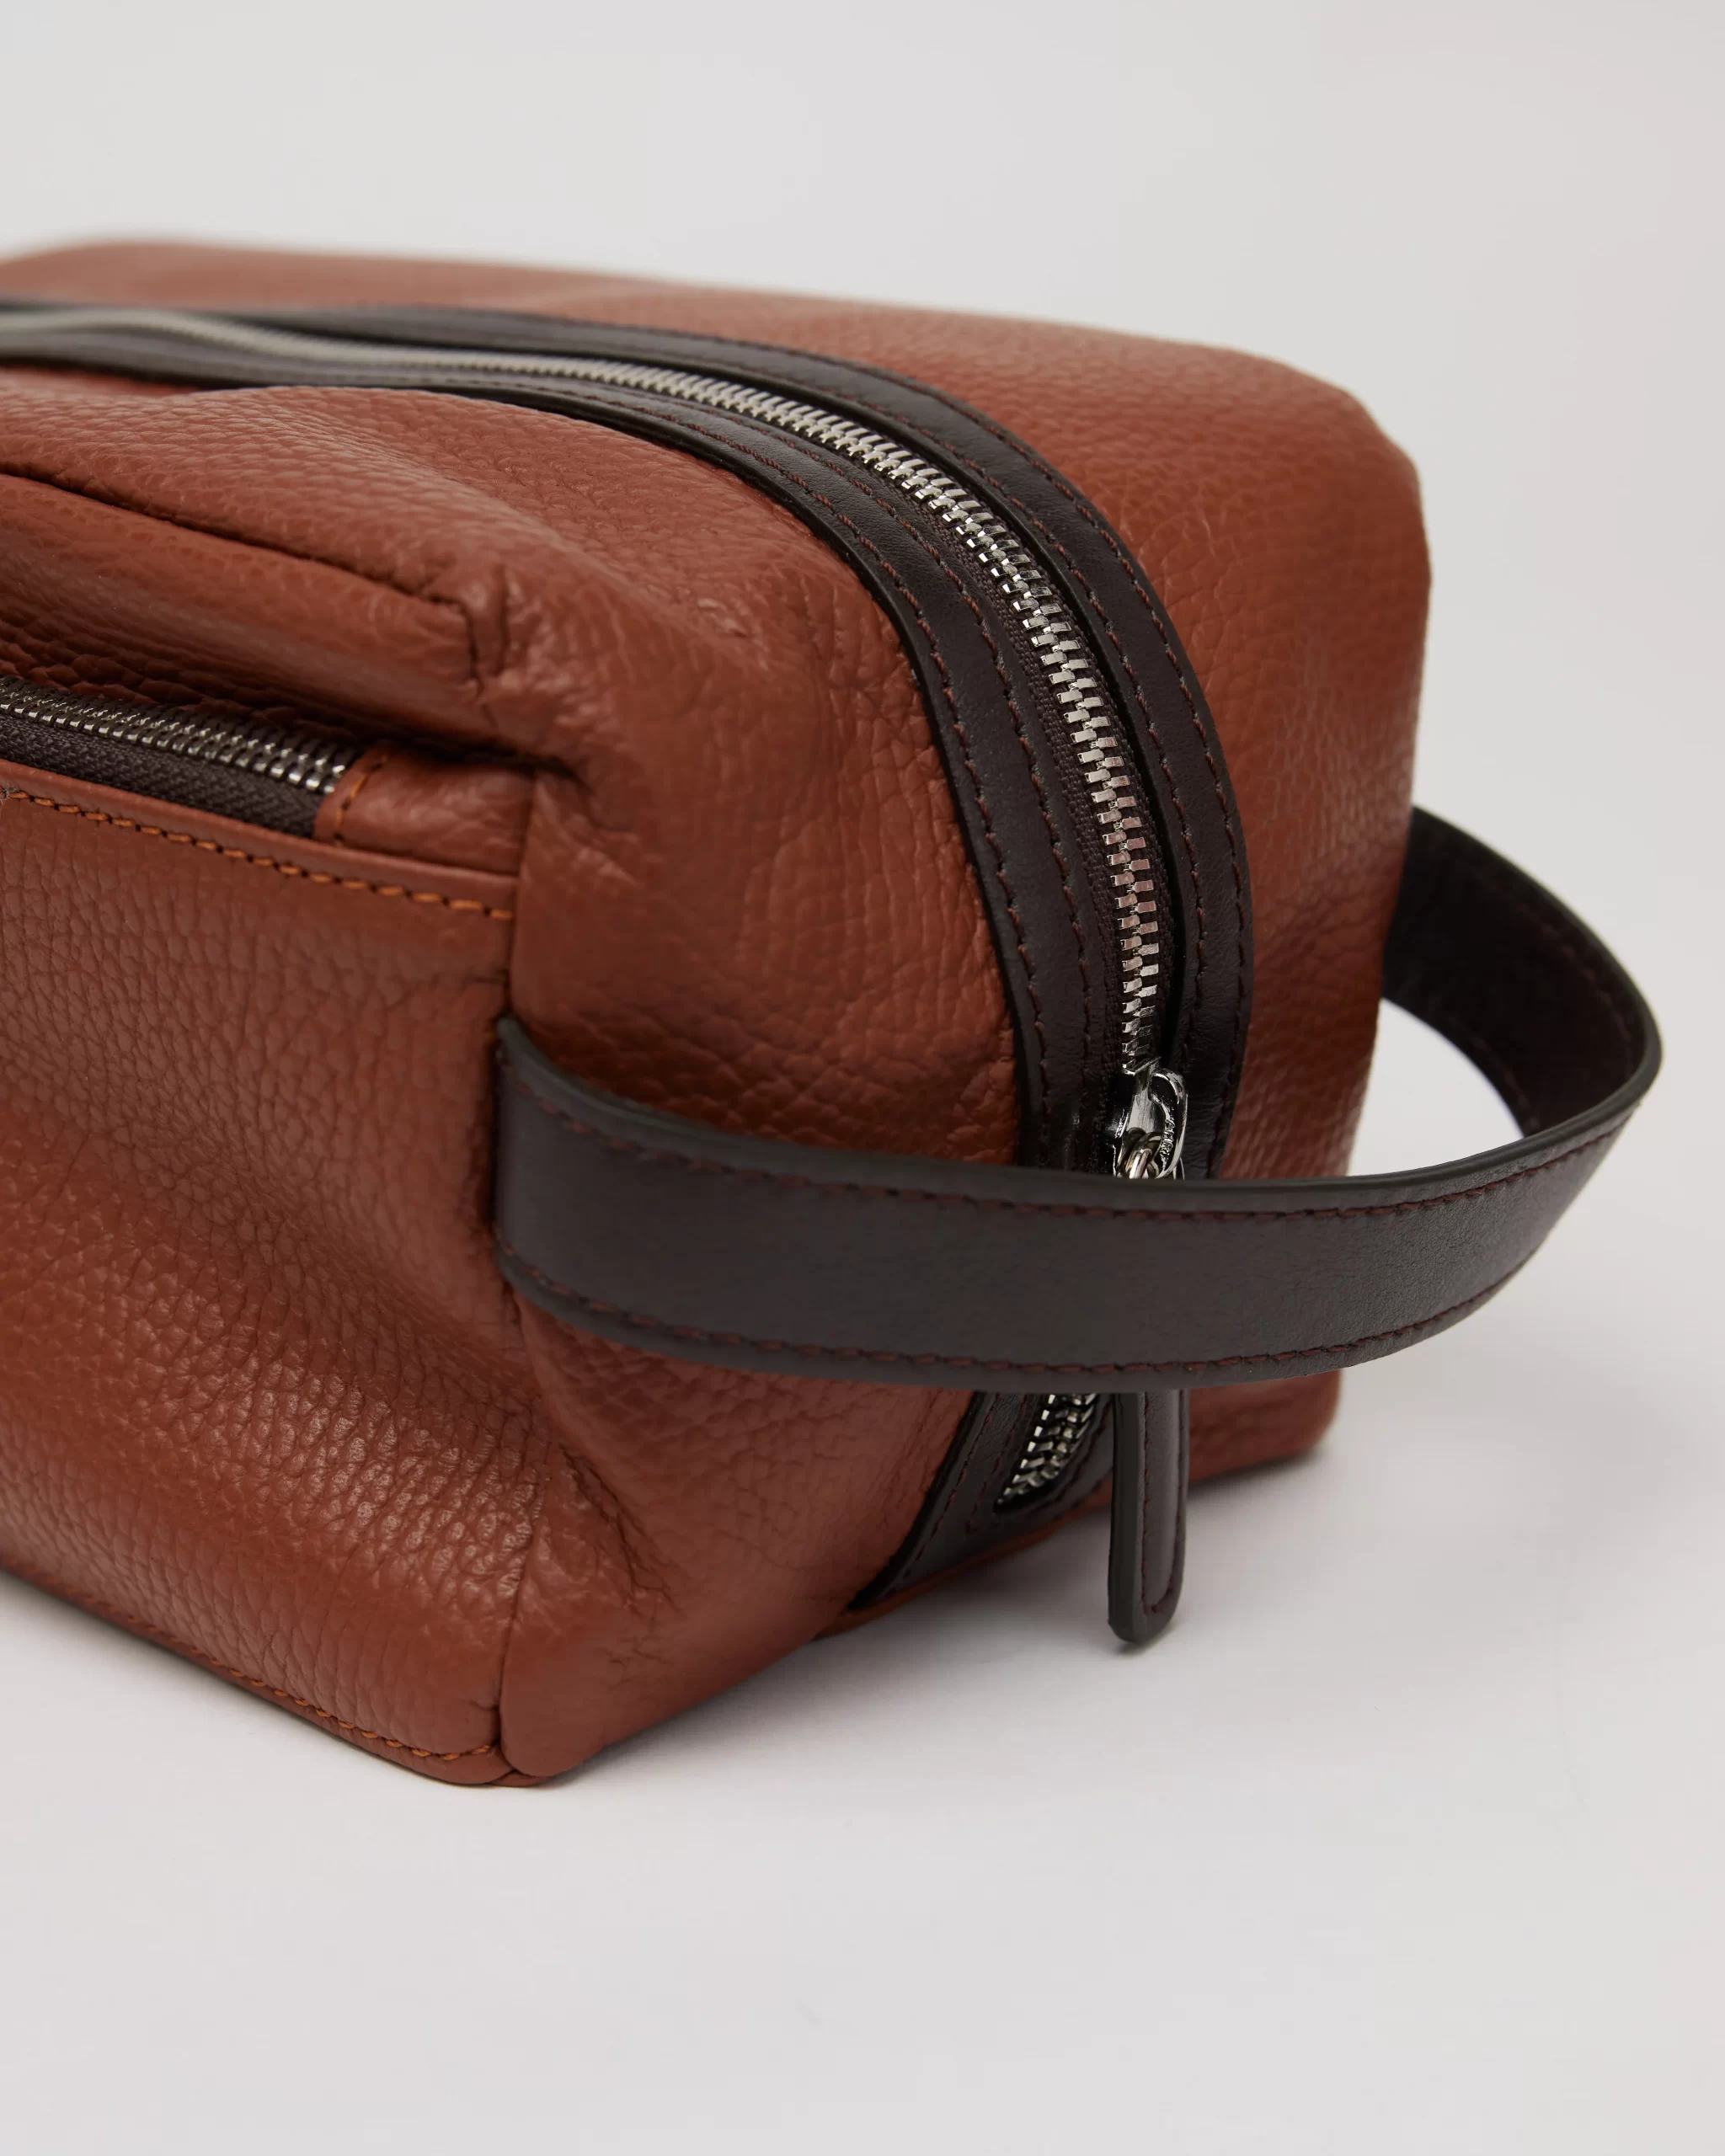 luxury mens leather toiletry bag